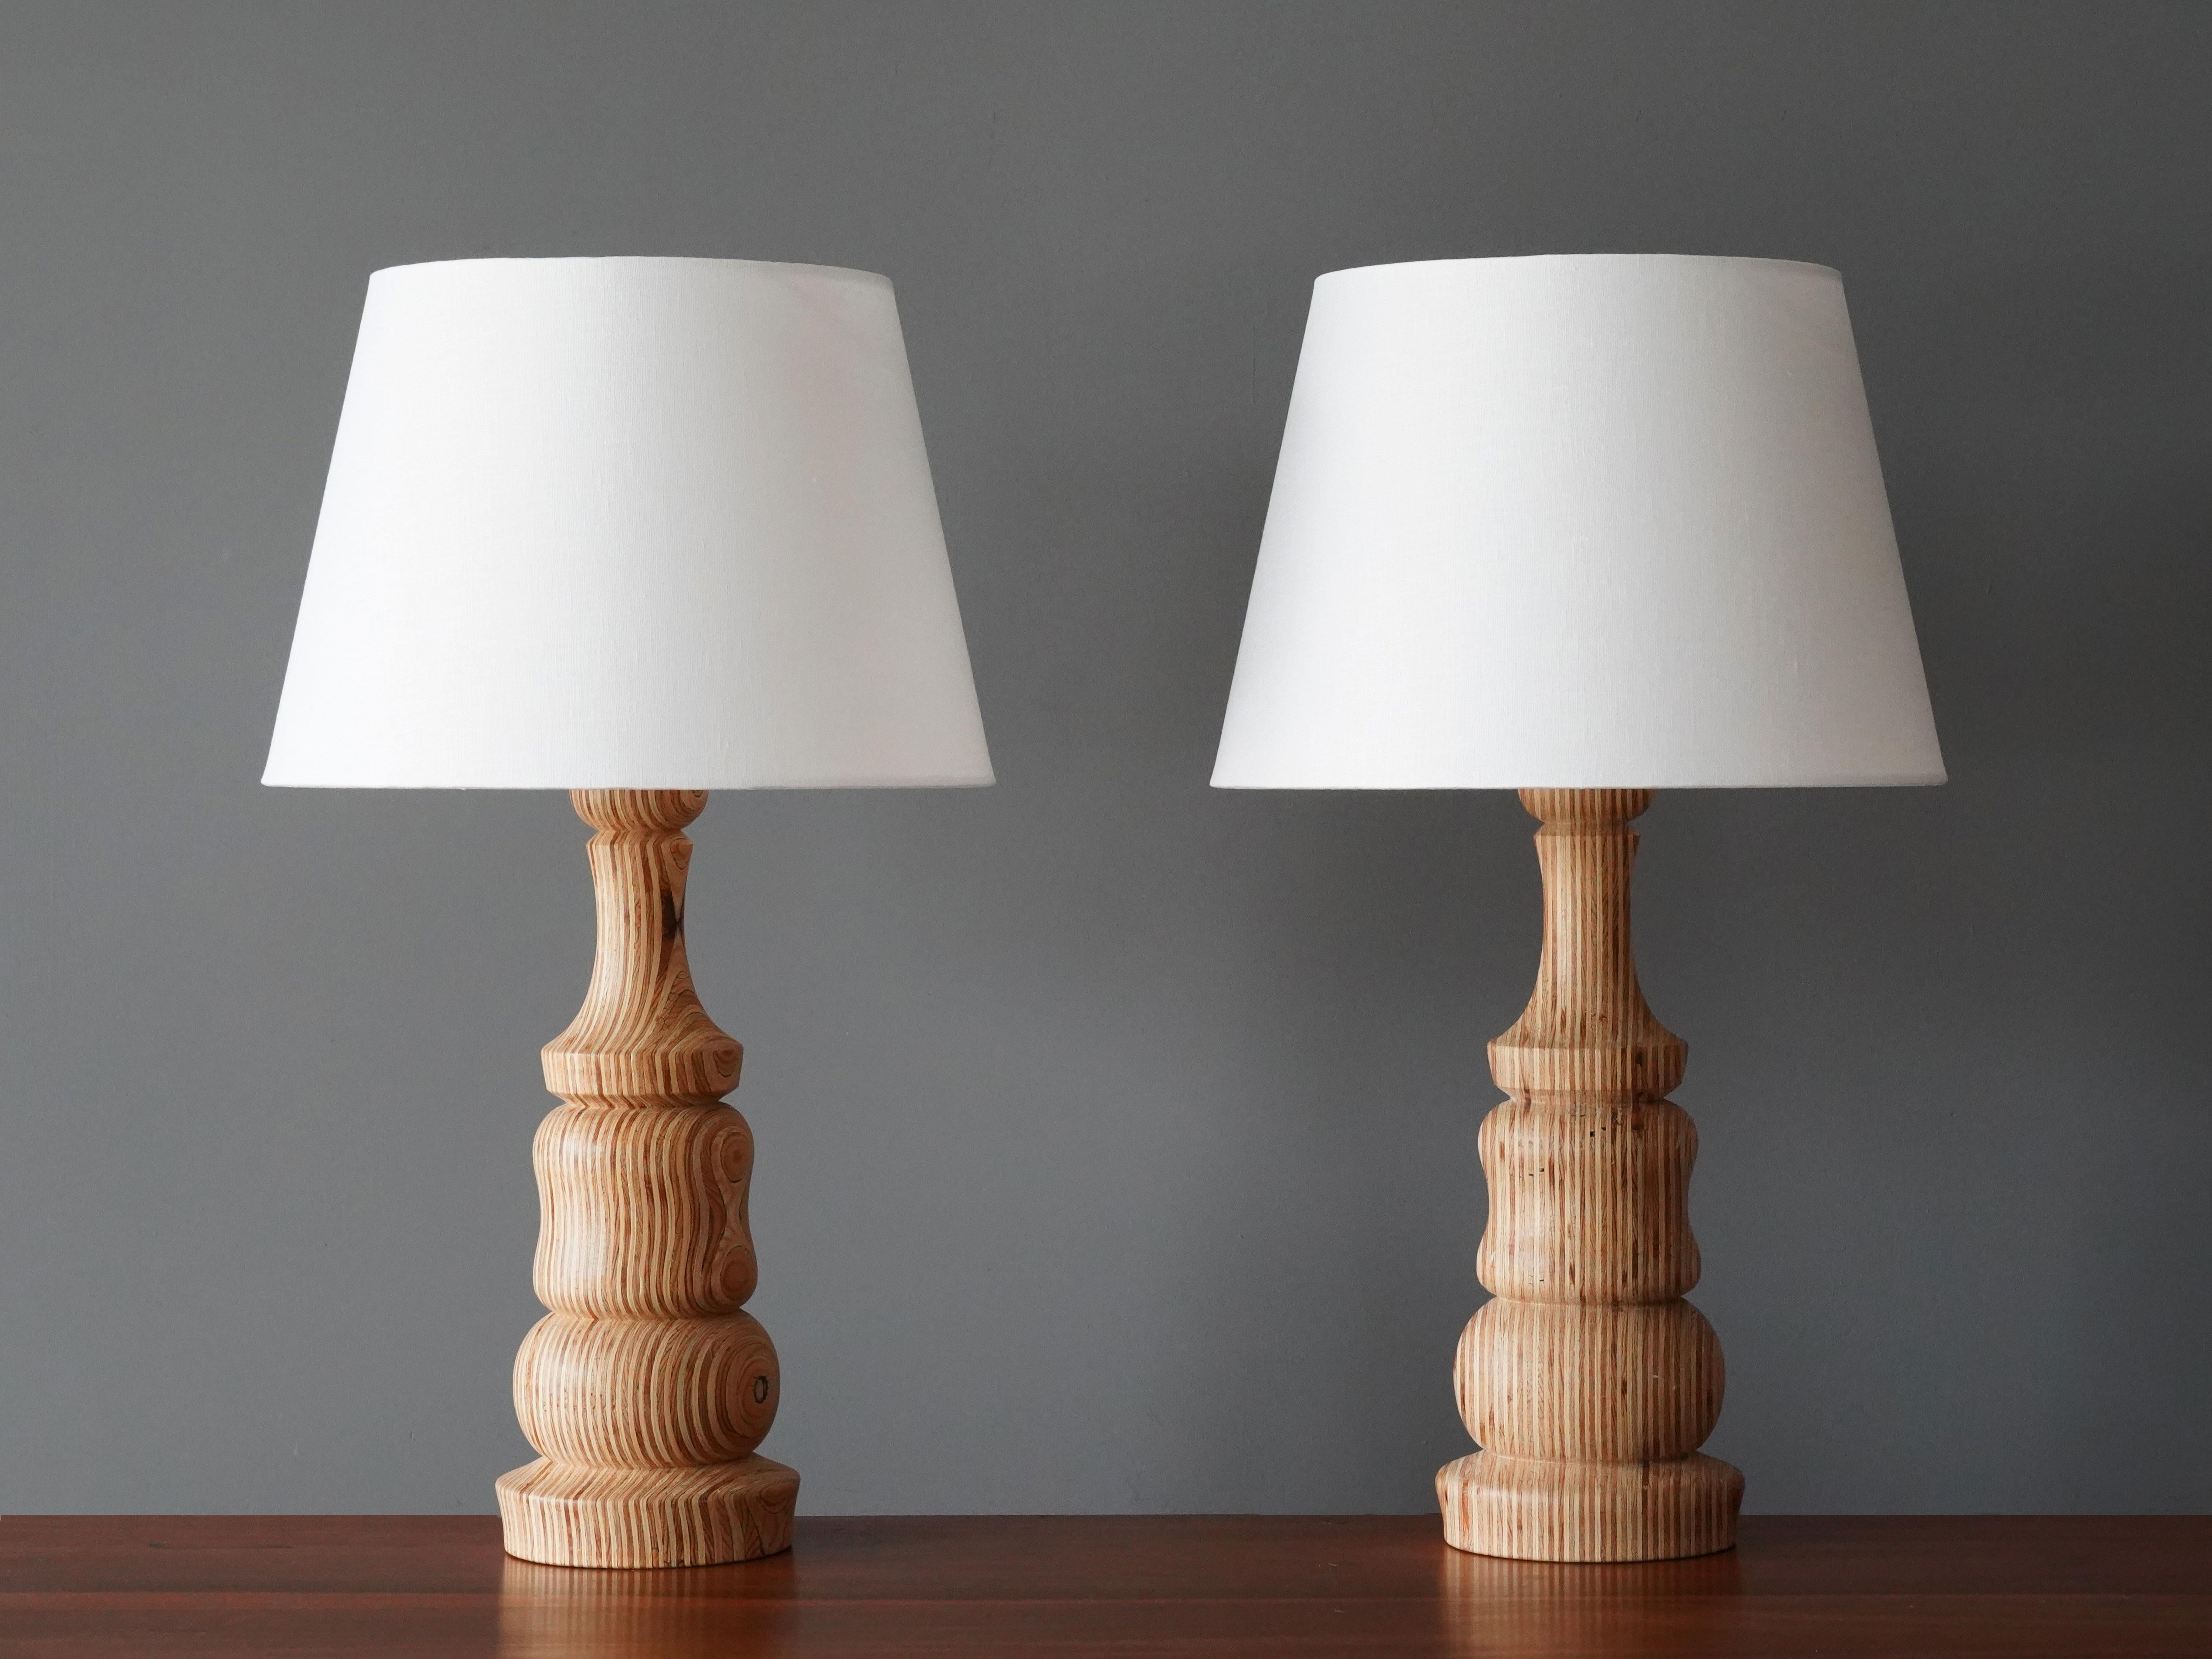 A pair of modernist table lamps. In stack-laminated turned wood with a highly sculptural appeal and beautiful texture. Produced in Sweden by an anonymous creator, 1960s.

Other designers of the period include Paavo Tynell, Josef Frank, Alvar Aalto.